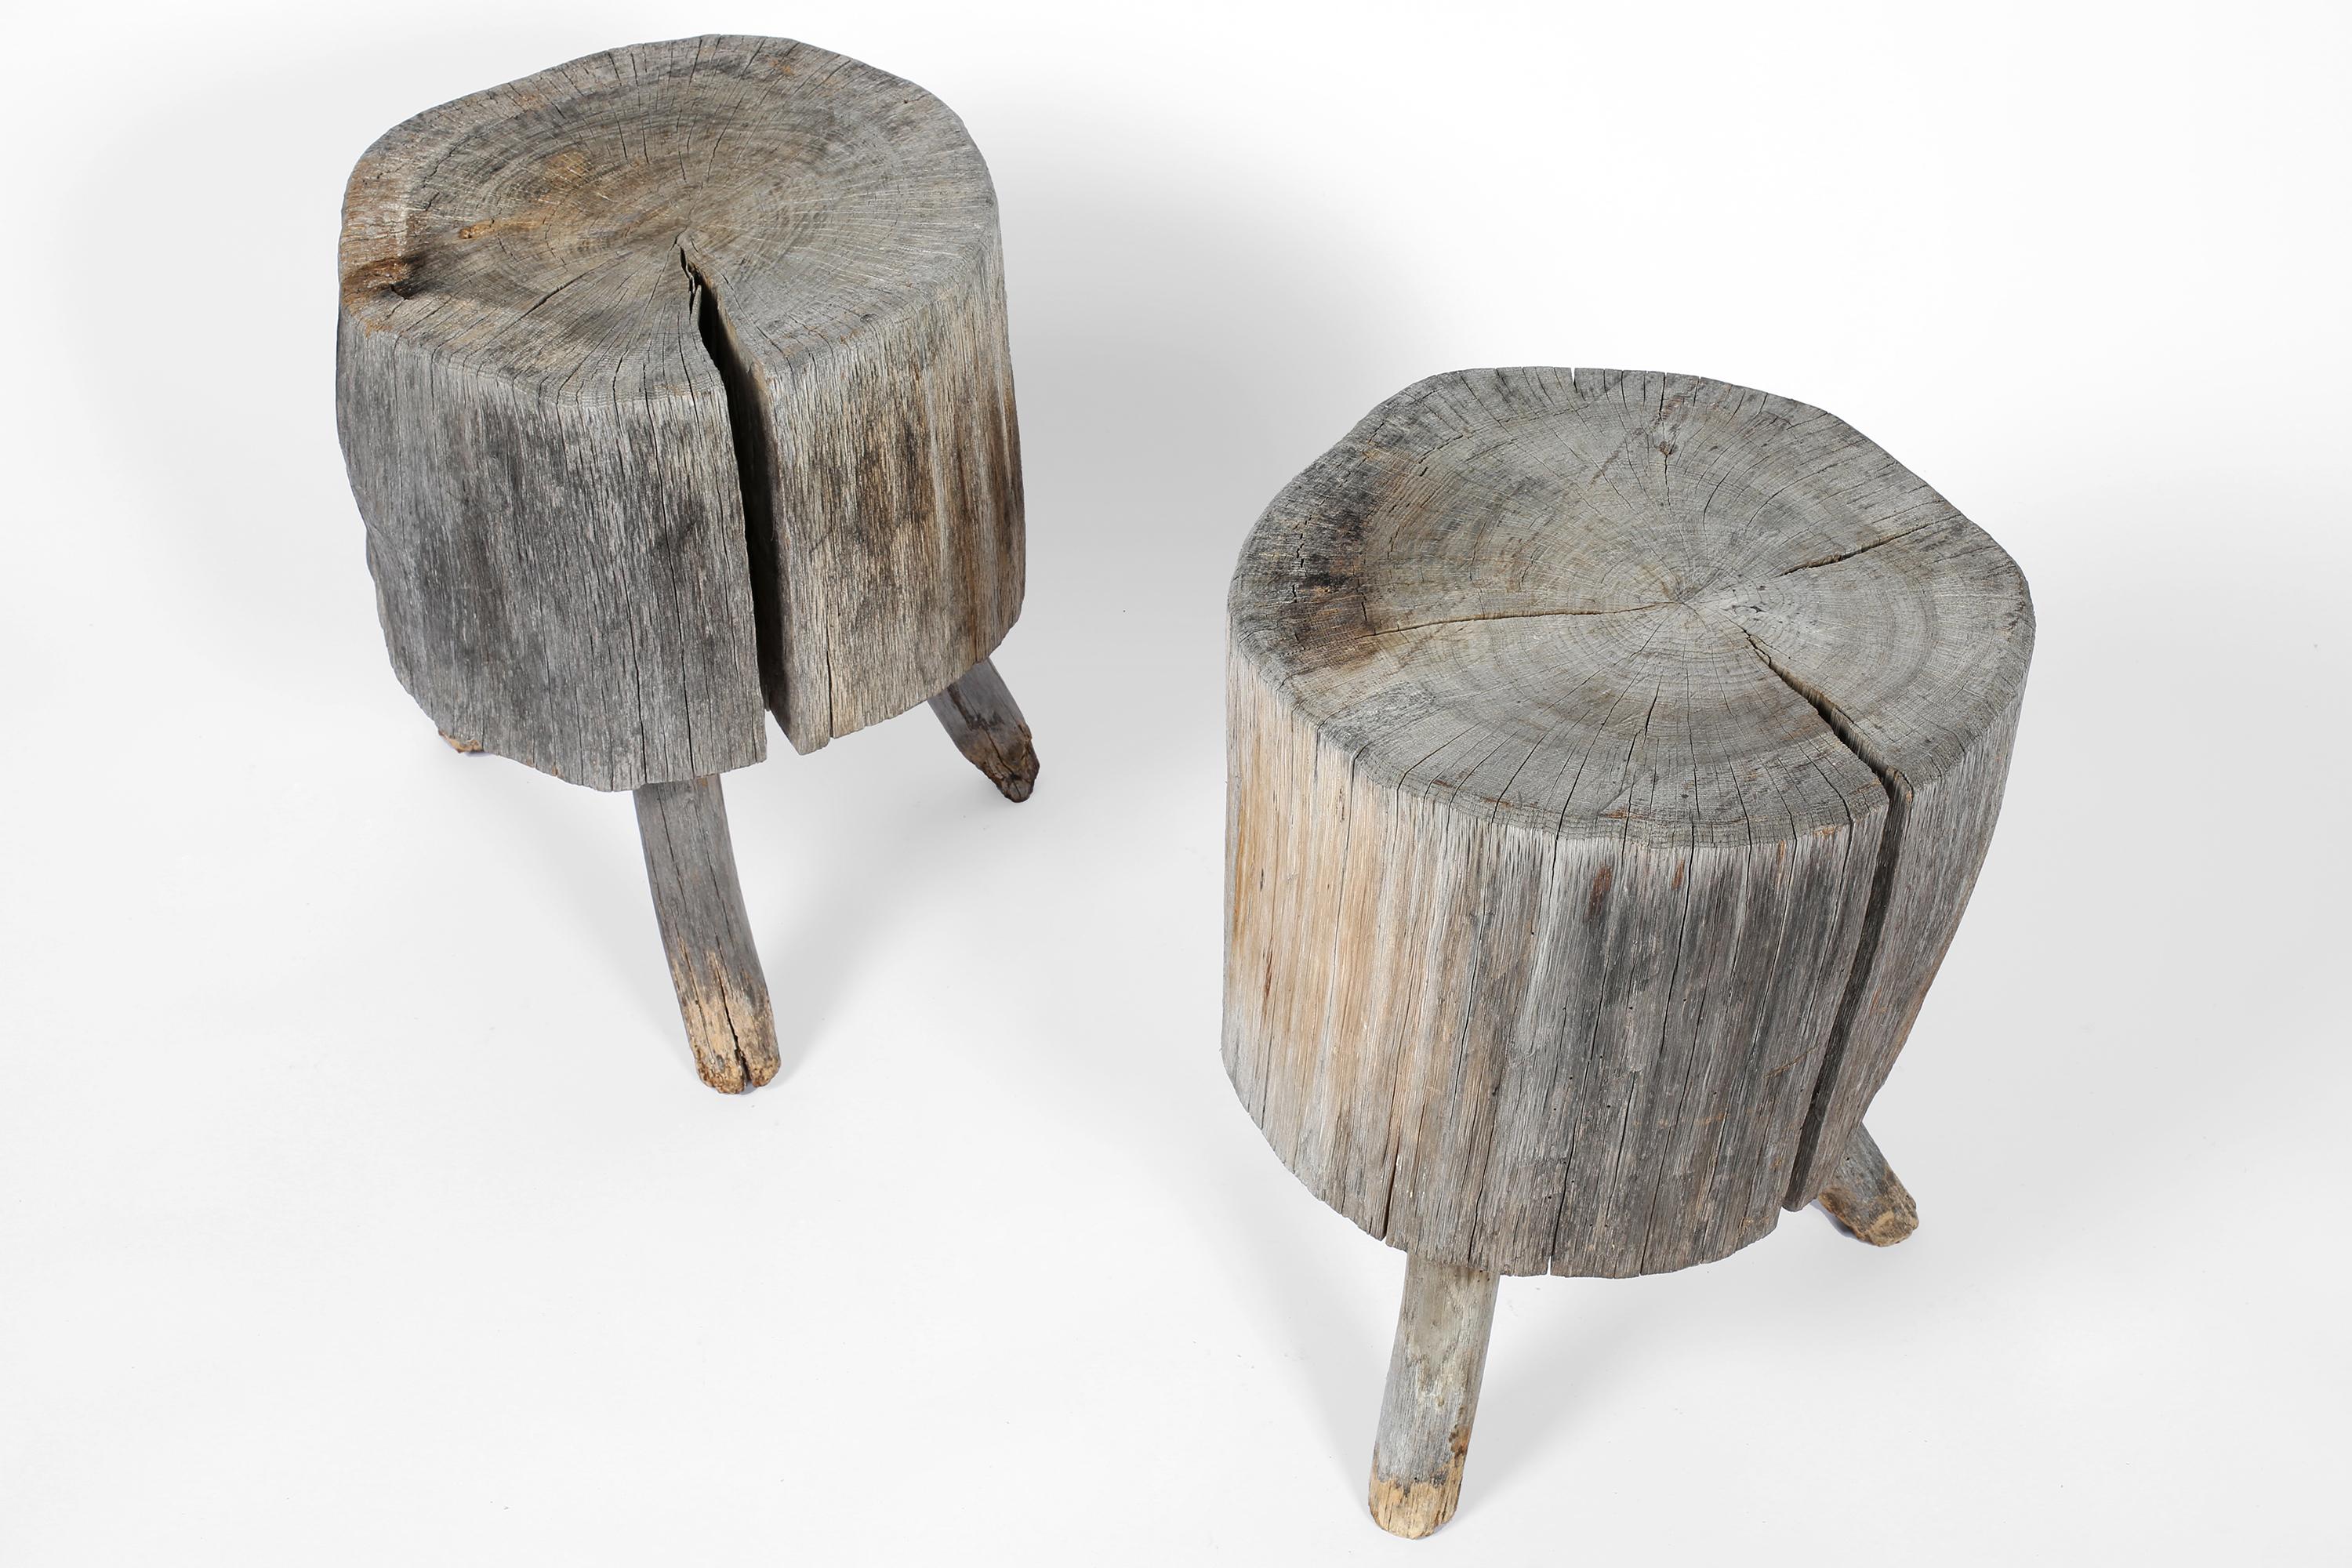 A scarce matching pair of 19th century chopping block side tables on their original tripod legs. Constructed from thick blocks of elm which have beautifully weathered to a grey patina. French, c. 1860.